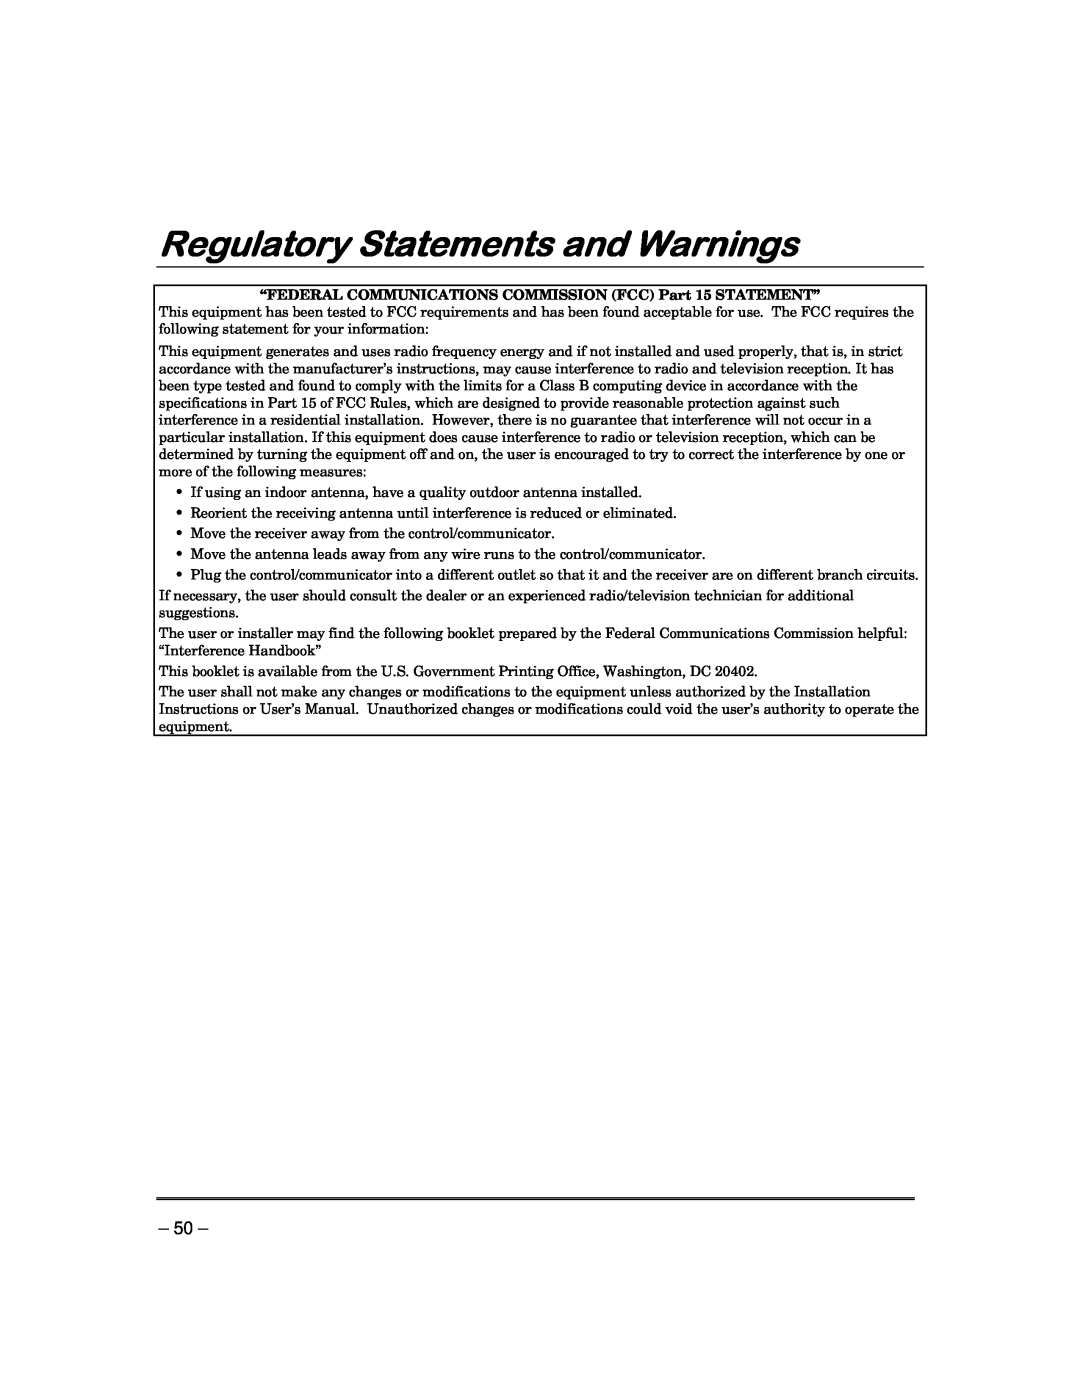 Garmin FA168CPS manual Regulatory Statements and Warnings, “FEDERAL COMMUNICATIONS COMMISSION FCC Part 15 STATEMENT” 